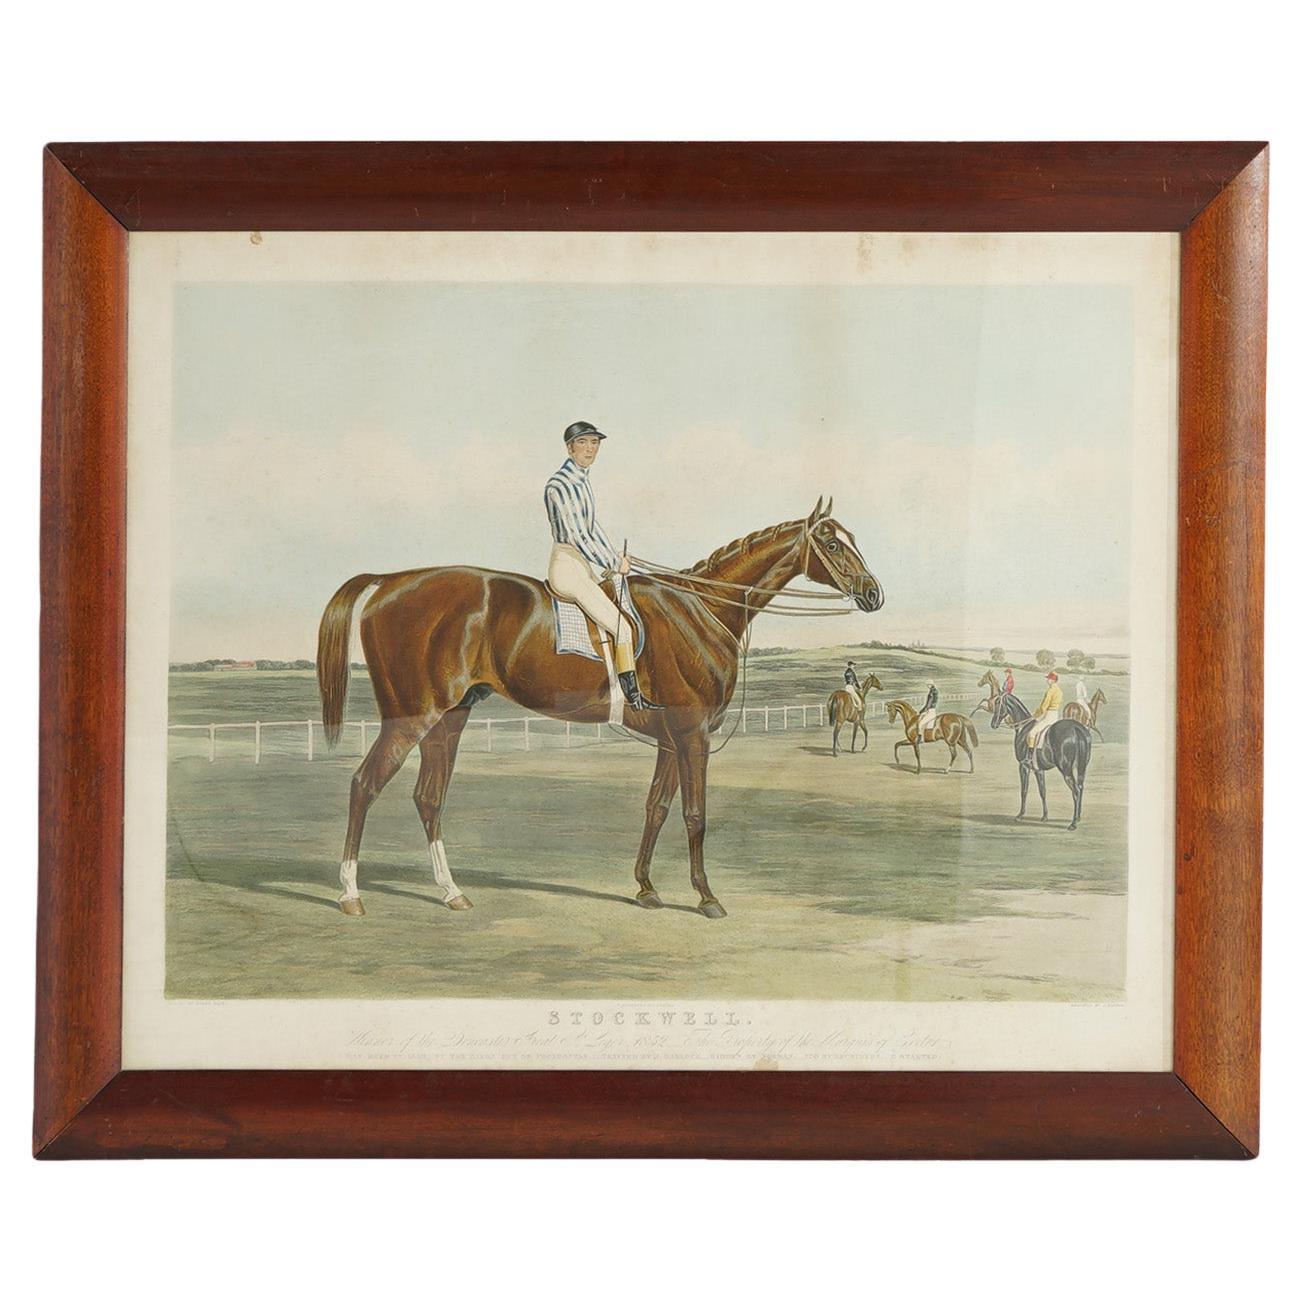 Antique Engraving “Stockwell” J. Harris, Painted by Harry Hall For Sale